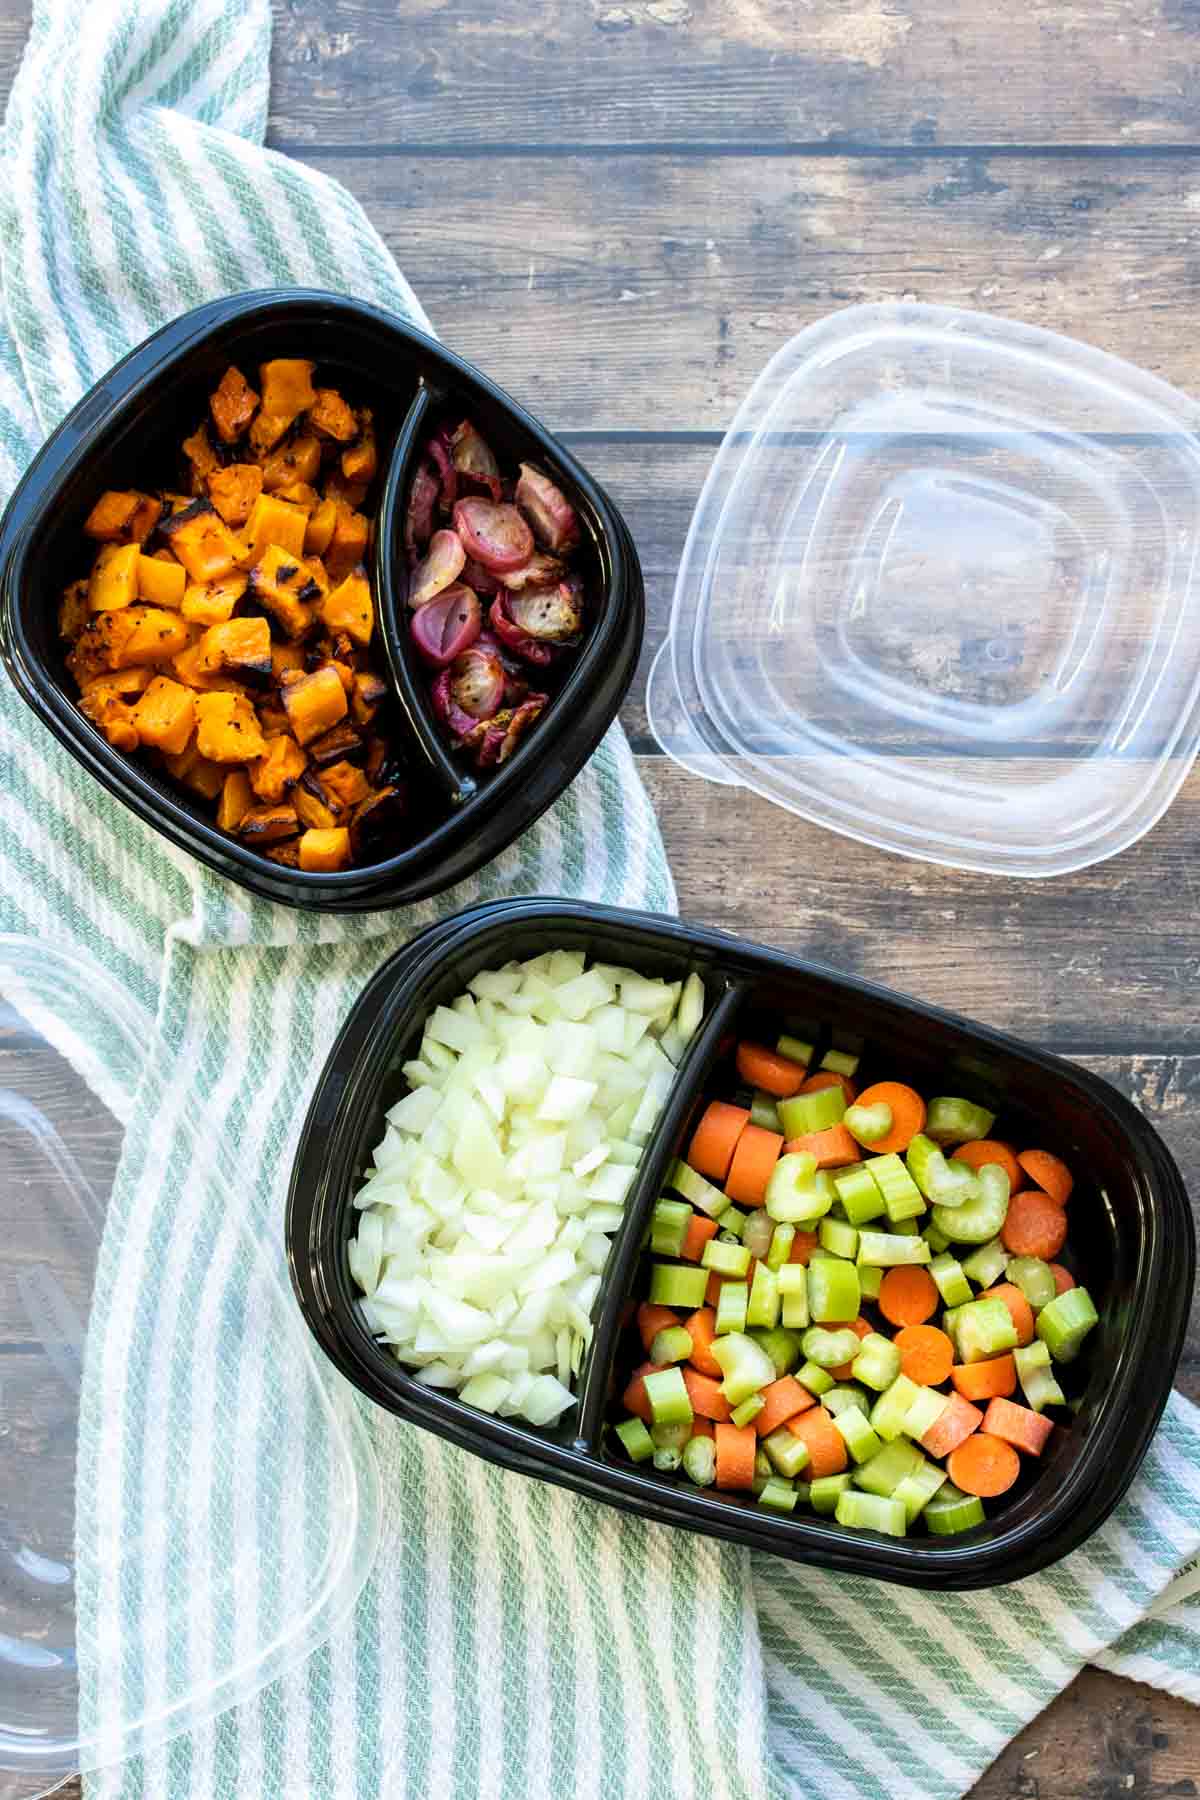 Black containers with compartments filled with raw chopped veggies.